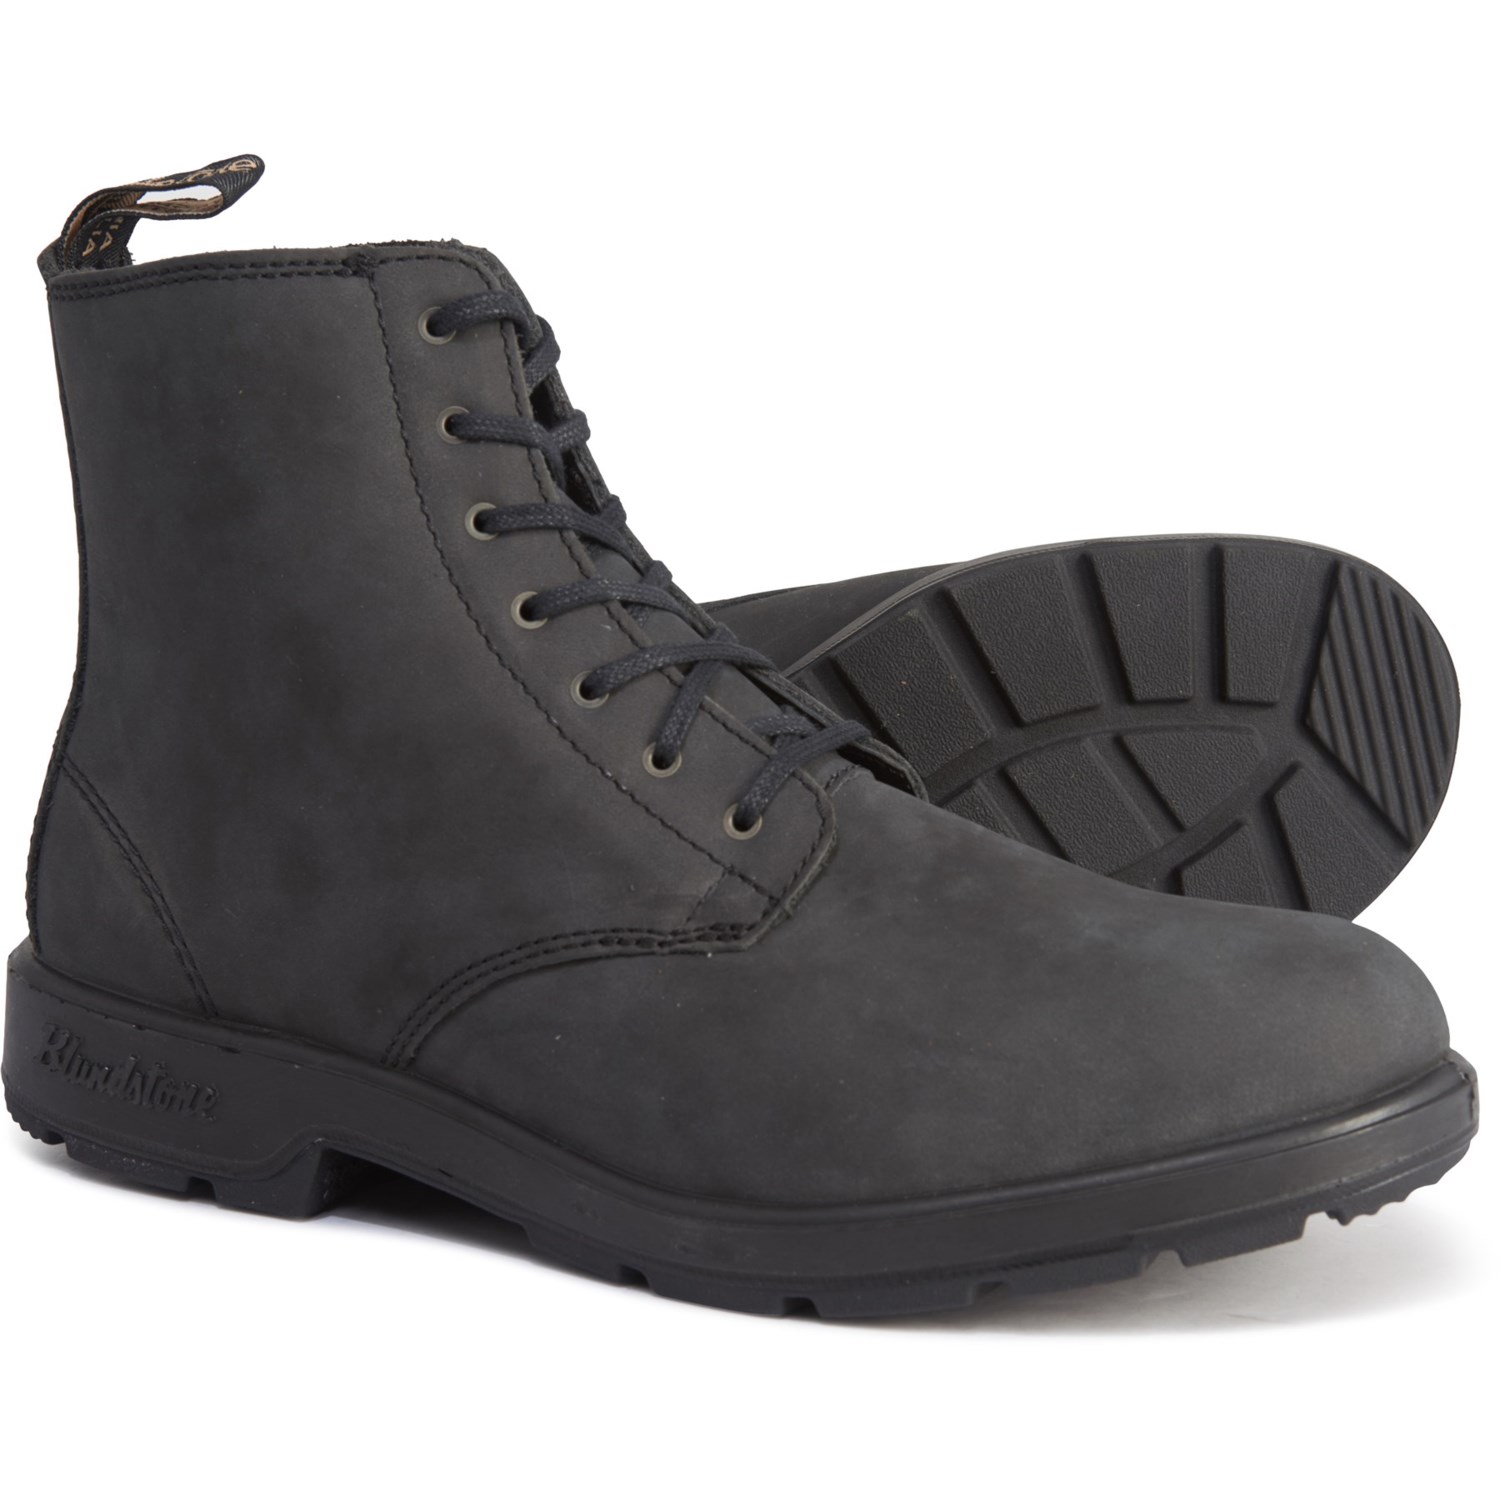 blundstone lace up boots mens